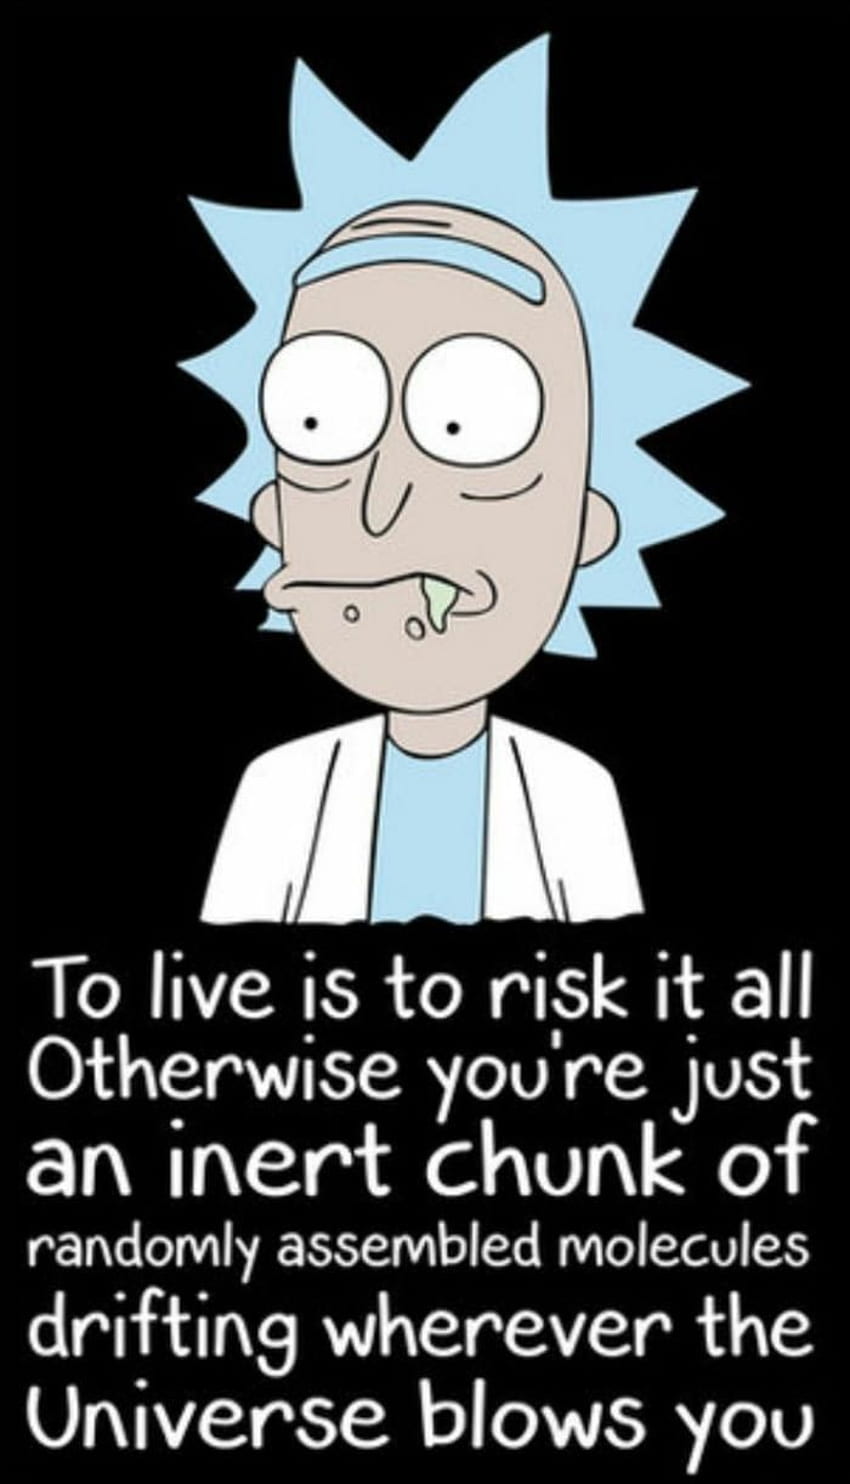 My Rick and Morty favorite quote of this season. Rick and morty quotes, Rick and morty poster, Rick and morty HD phone wallpaper